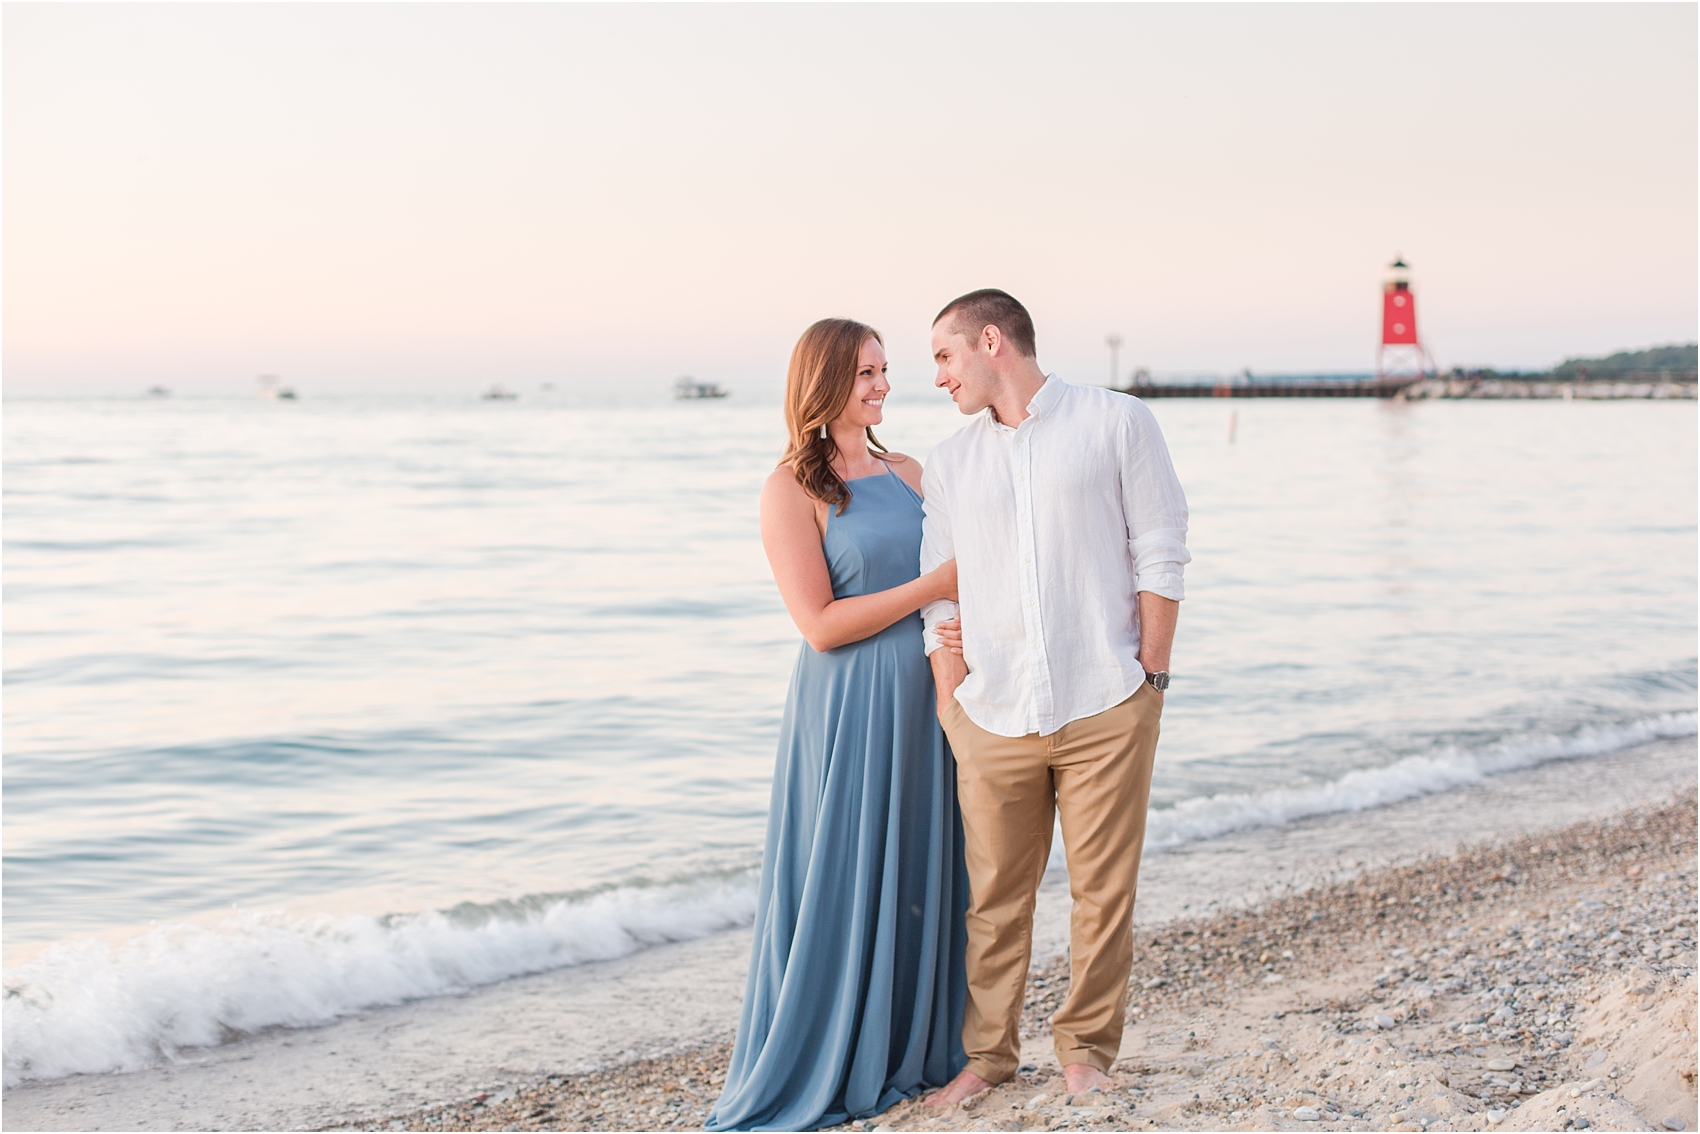 romantic-sunset-engagement-photos-at-michigan-beach-park-in-charlevoix-mi-by-courtney-carolyn-photography_0004.jpg